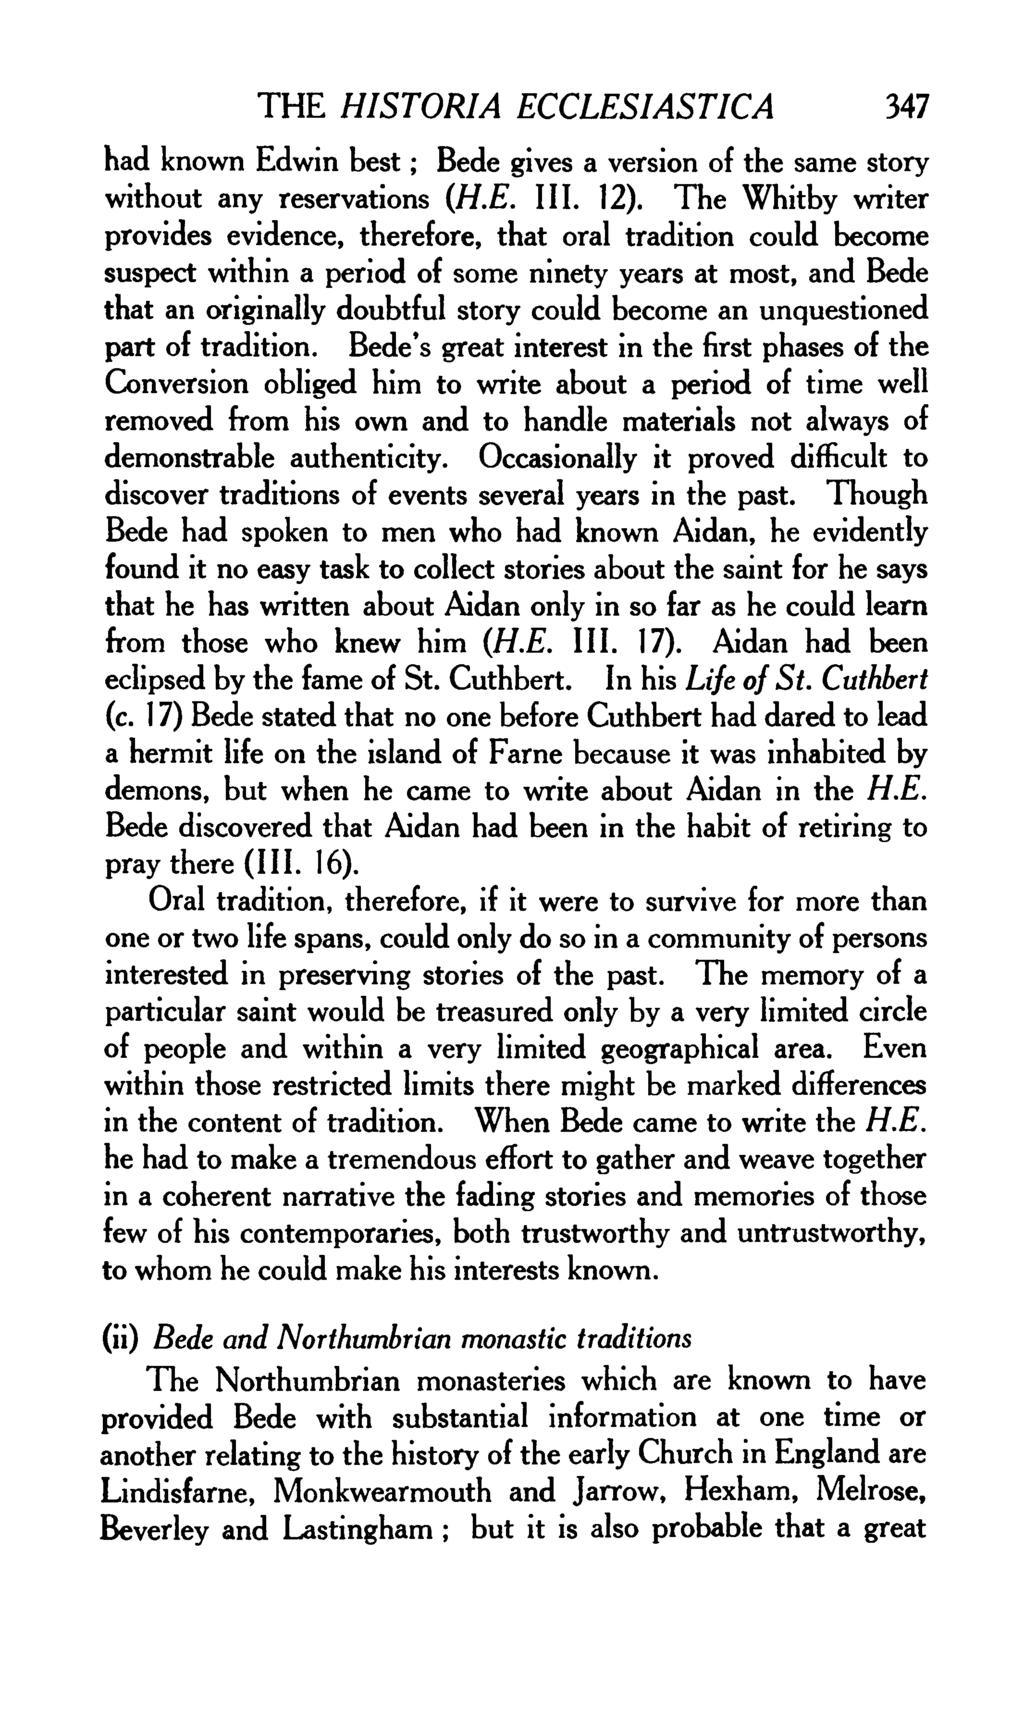 THE HISTORIA ECCLESIASTICA 347 had known Edwin best; Bede gives a version of the same story without any reservations (H.E. III. 12).